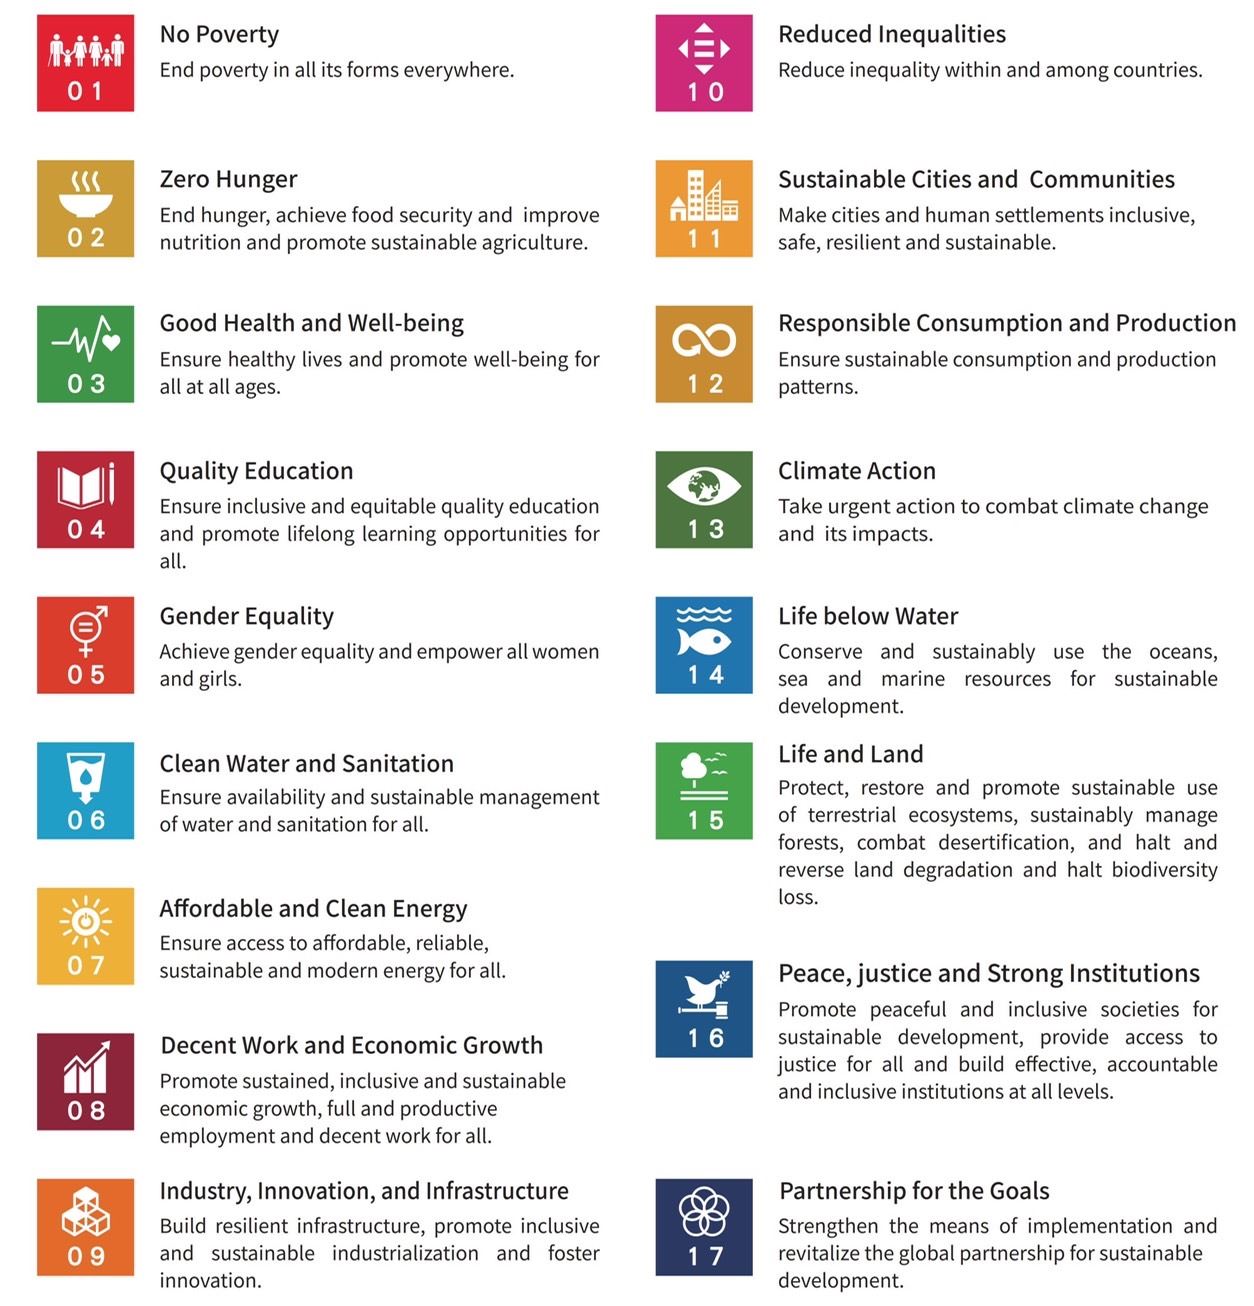 Introduction to Sustainable Development Goals (SDGs)